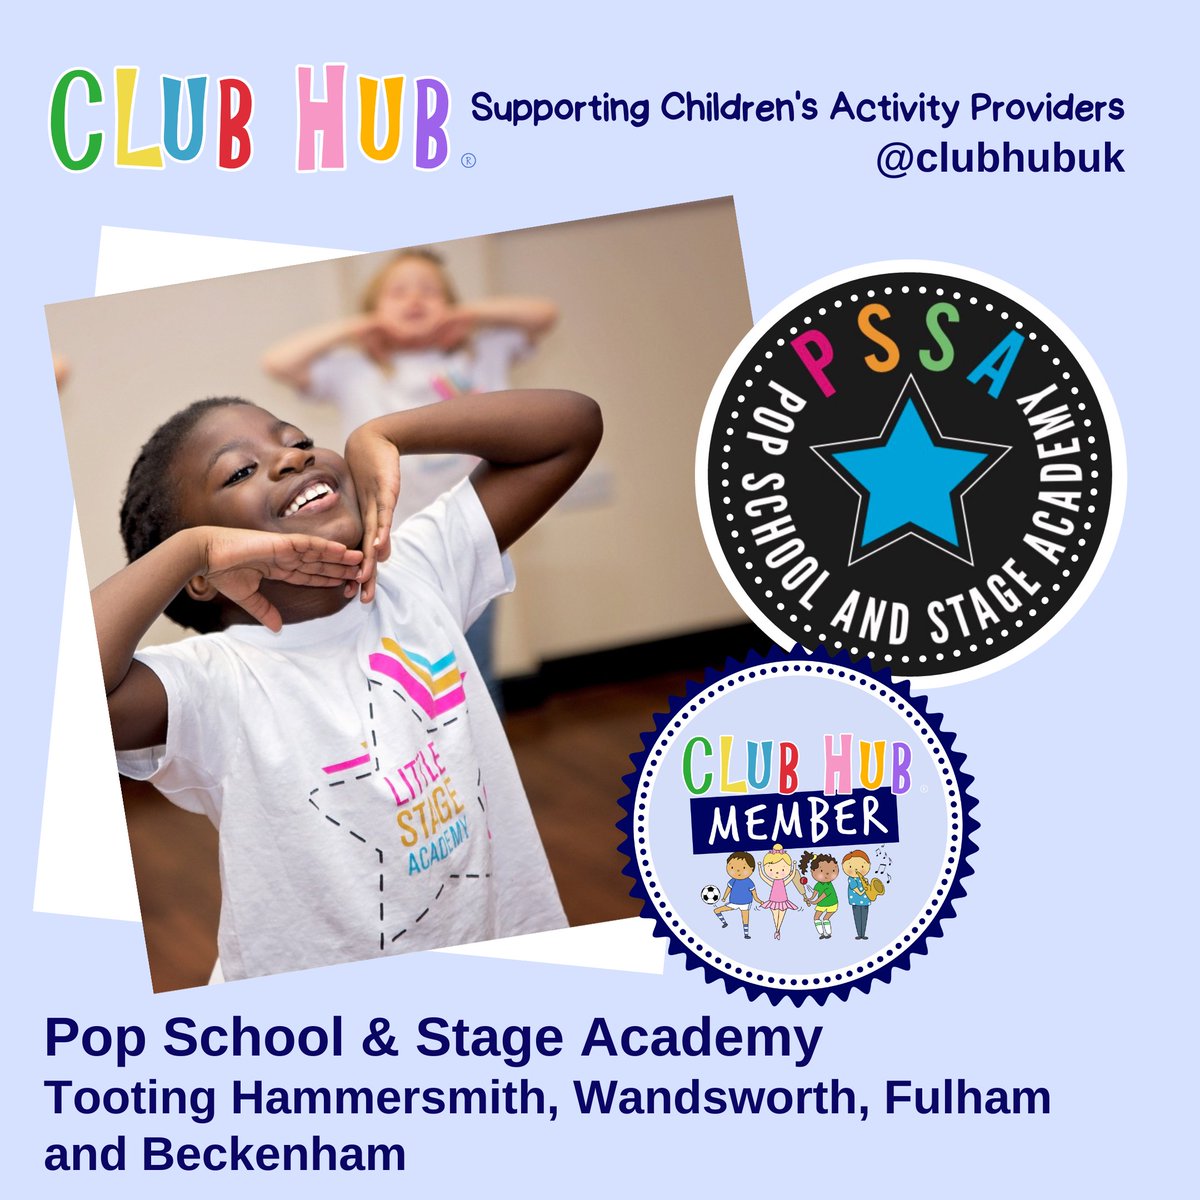 Do you live in Tooting, Hammersmith, Wandsworth, Fulham or Beckenham? Book a trial class with Pop School & Stage Academy - PSSA on 07943 656092 or INFO@PSSA.CO.UK
#clubhubuk #clubhubmember #stageschool #londonmums #tooting #hammersmith #wandsworth #fulham #beckenham